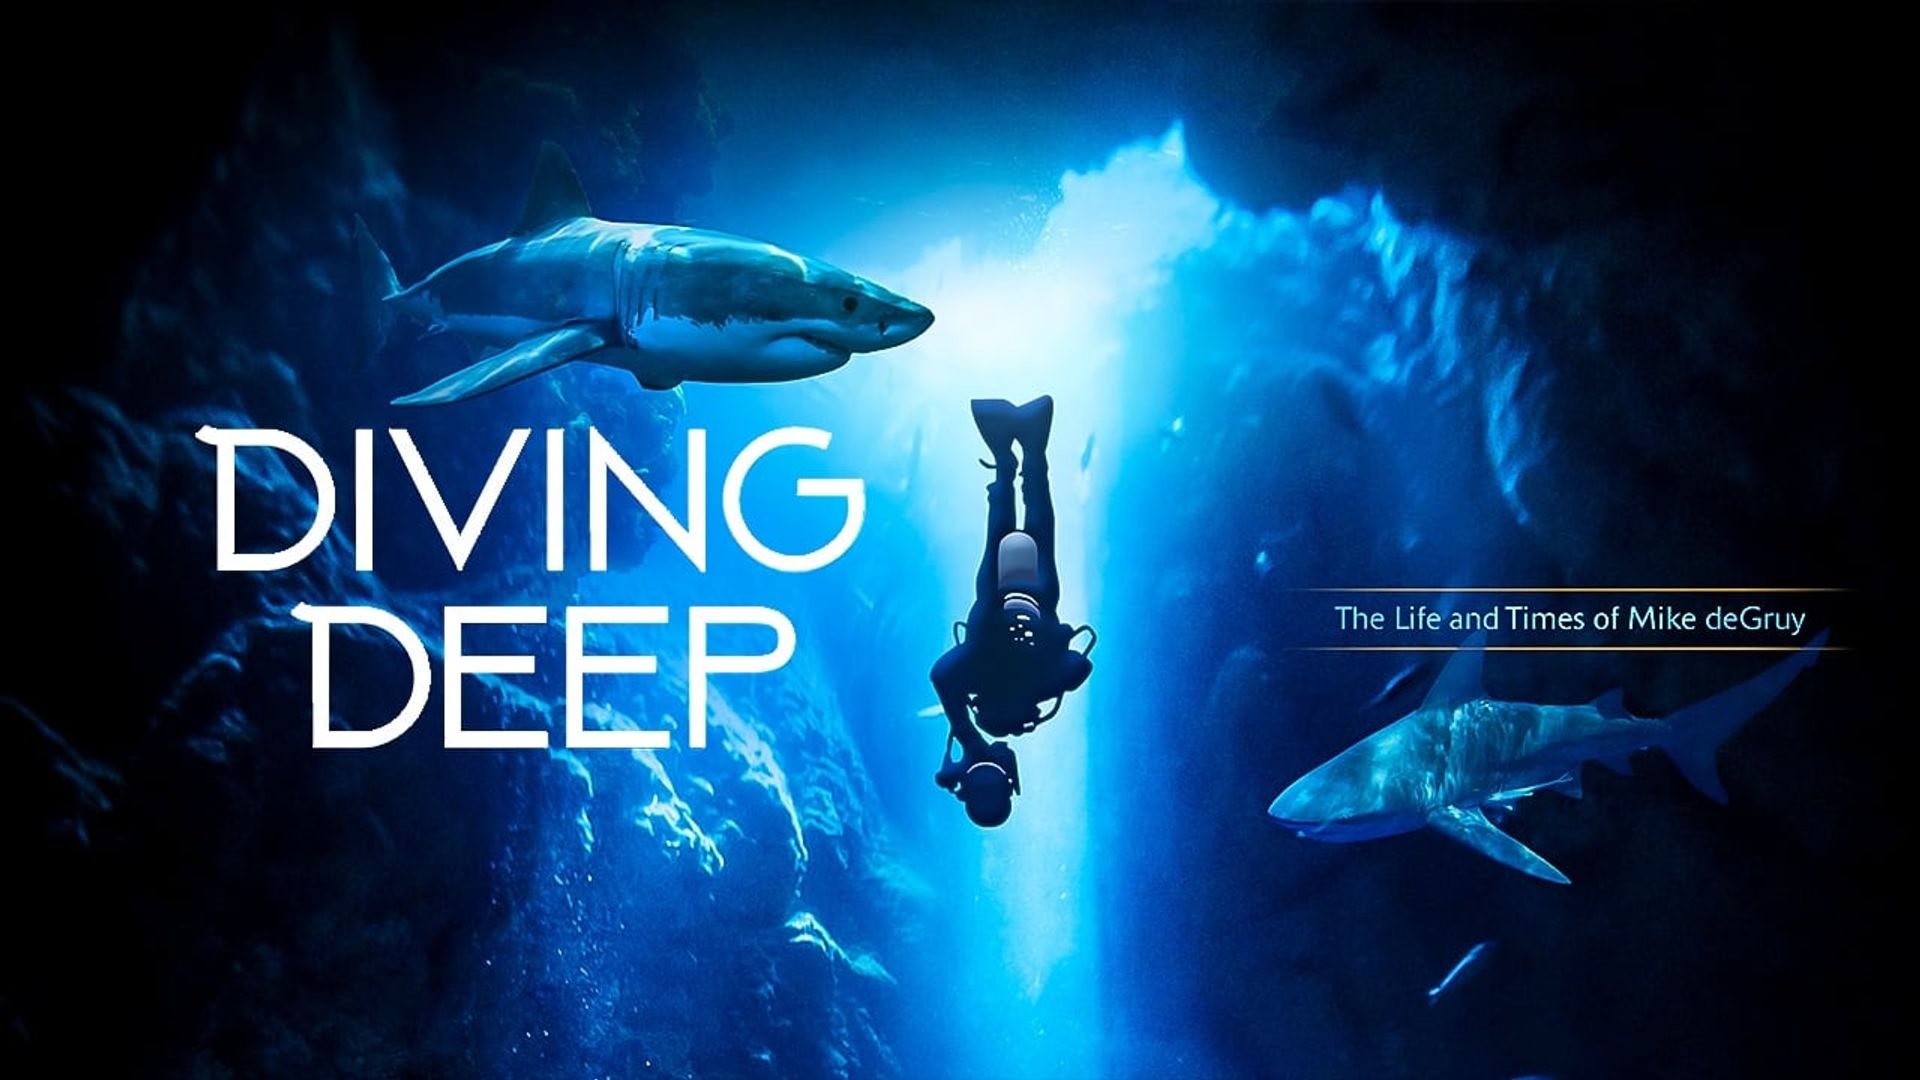 Diving Deep: The Life and Times of Mike deGruy background